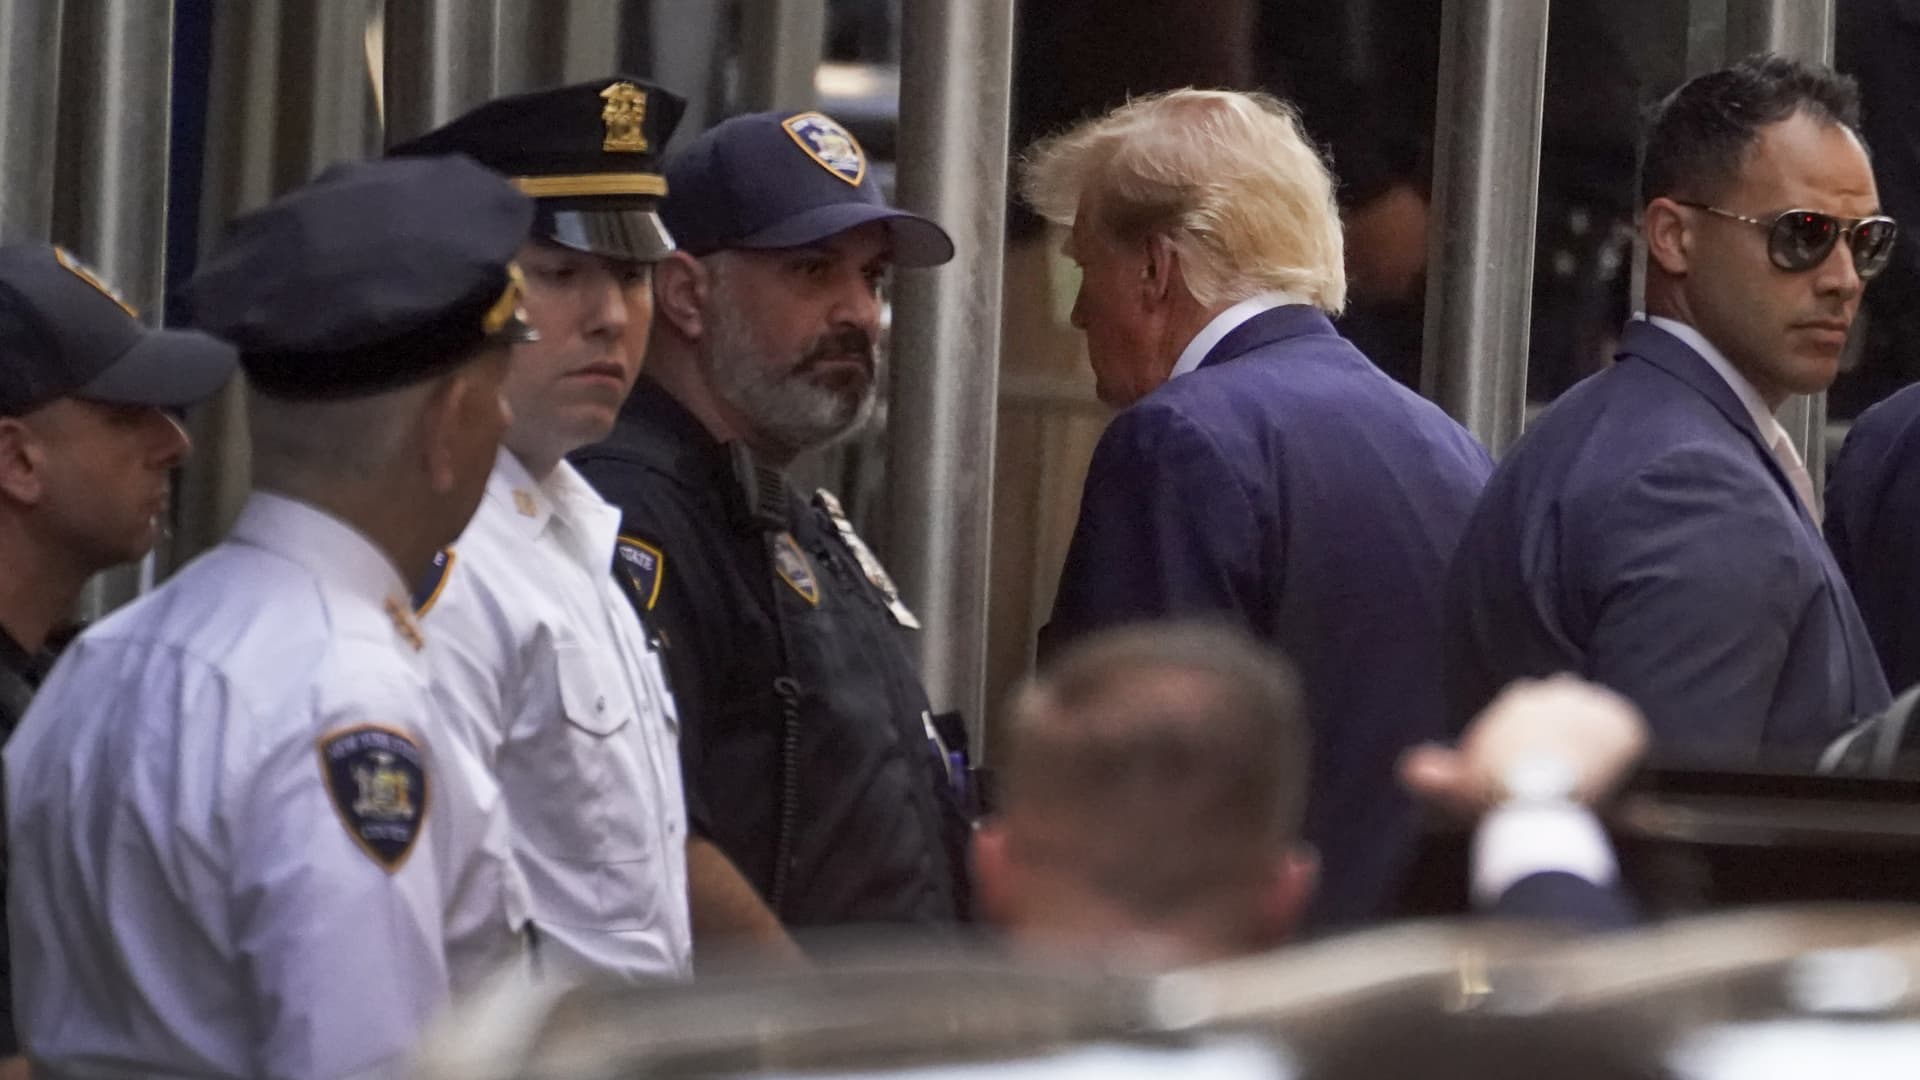 Former President Donald Trump, second from right, arrives at the Manhattan District Attorney's office, Tuesday, April 4, 2023, in New York. Trump is set to appear in a New York City courtroom on charges related to falsifying business records in a hush money investigation, the first president ever to be charged with a crime.